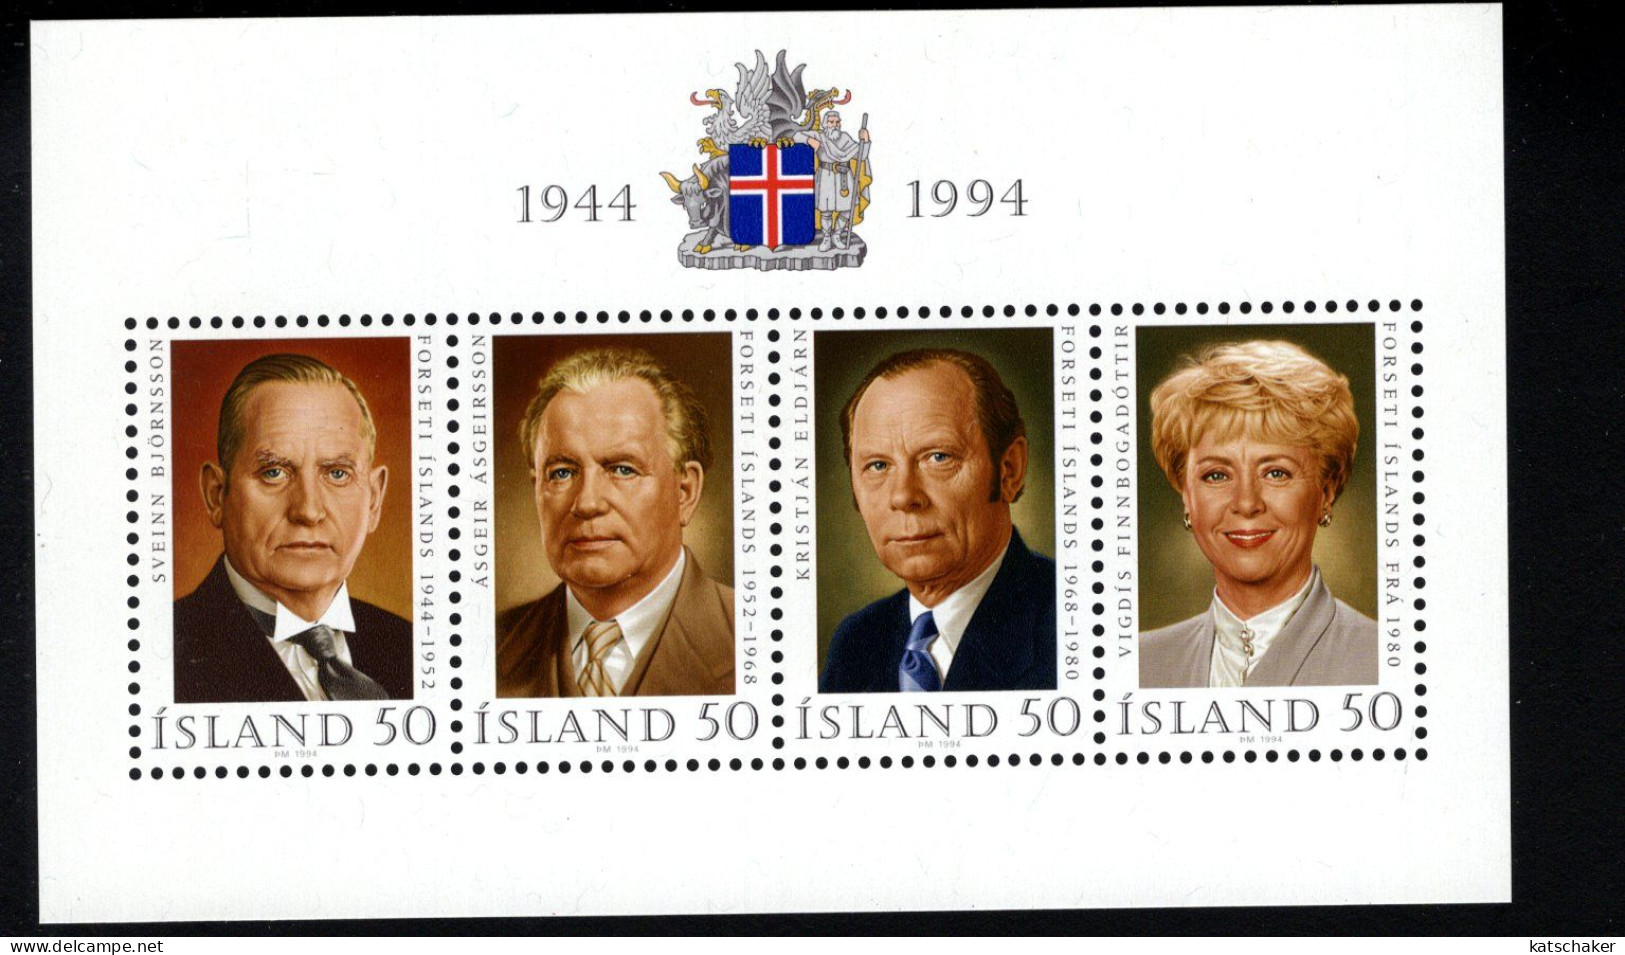 2021747384 1994 SCOTT 788 (XX)  POSTFRIS MINT NEVER HINGED - REPUBLIC OF ICELAND - 50TH ANNIV - Unused Stamps